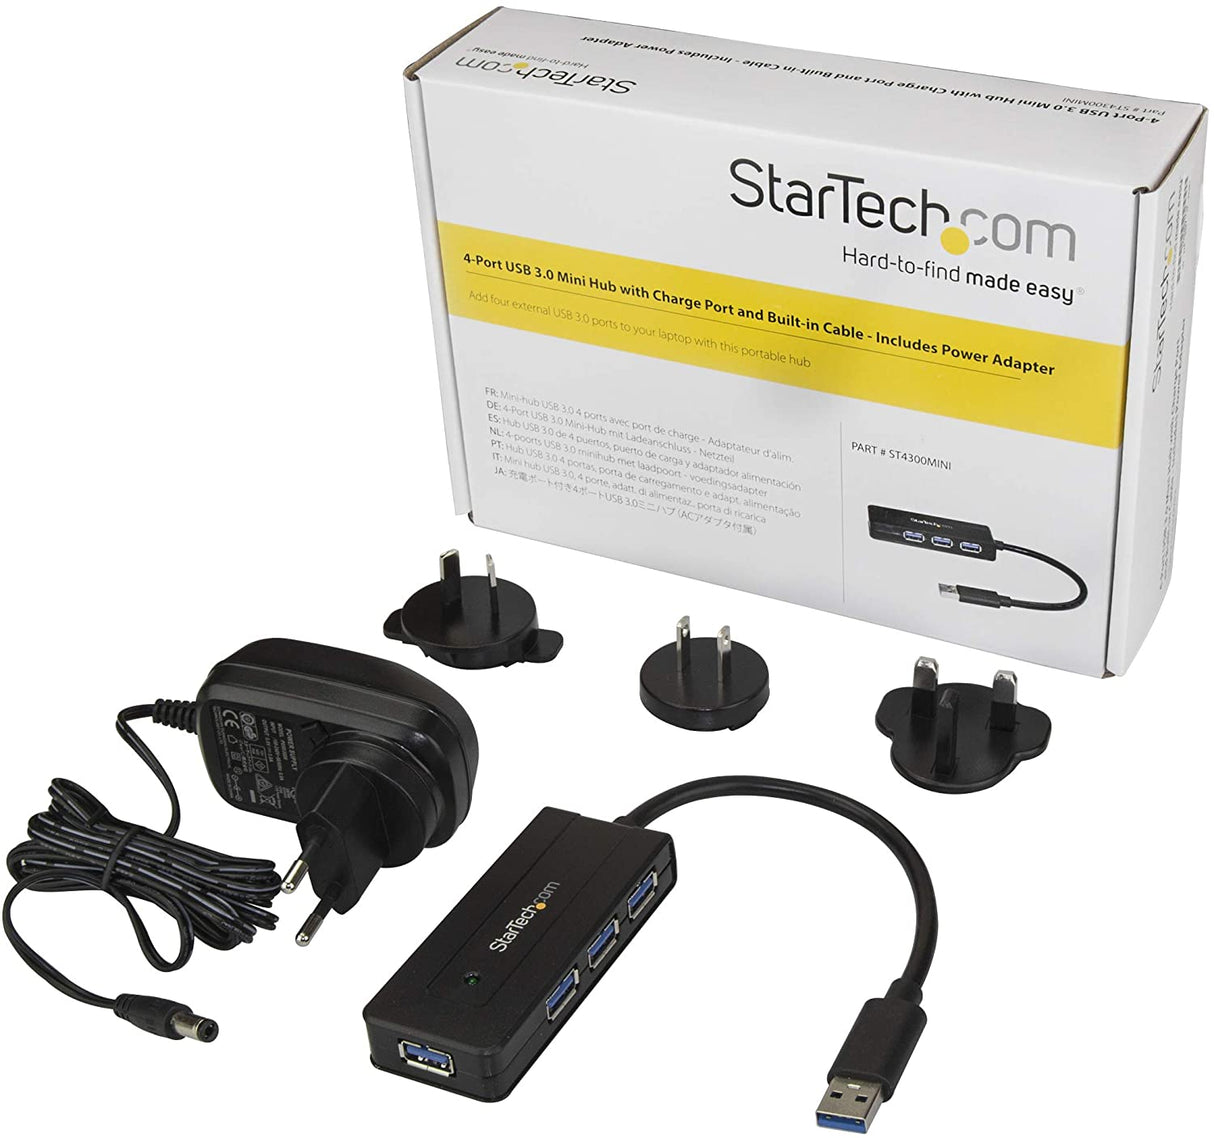 StarTech.com 4 Port USB 3.0 Hub SuperSpeed 5Gbps with Fast Charge Portable USB 3.1 Gen 1 Type-A Laptop/Desktop Hub - USB Bus Power or Self Powered for High Performance Mini/Compact (ST4300MINI), Black 4 x USB-A with Power Adapter Black